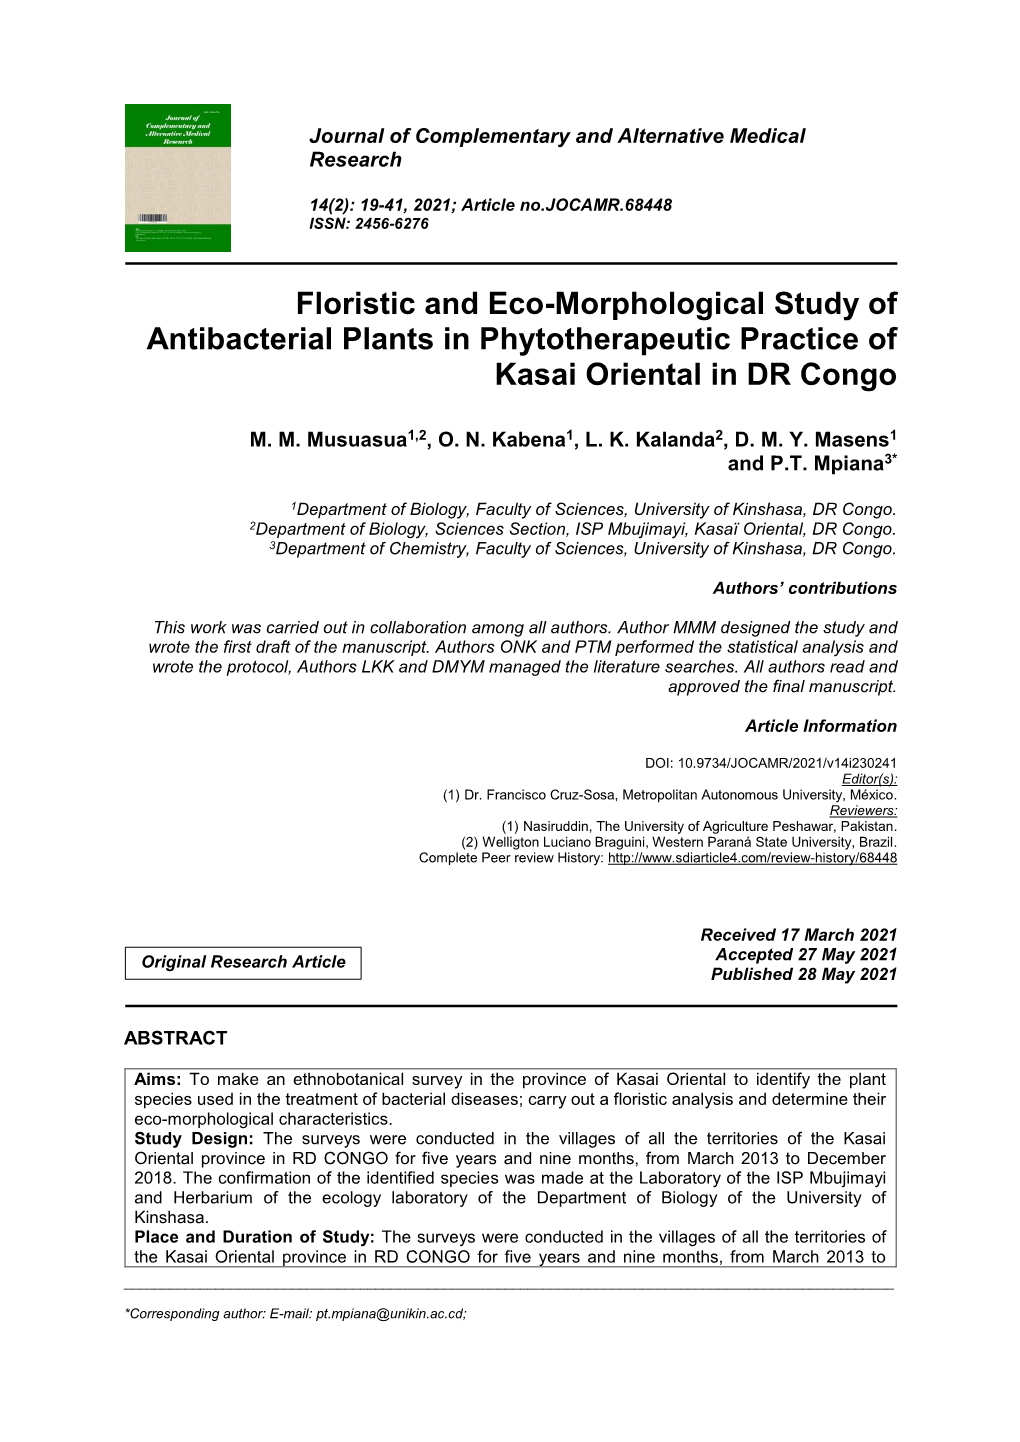 Floristic and Eco-Morphological Study of Antibacterial Plants in Phytotherapeutic Practice of Kasai Oriental in DR Congo